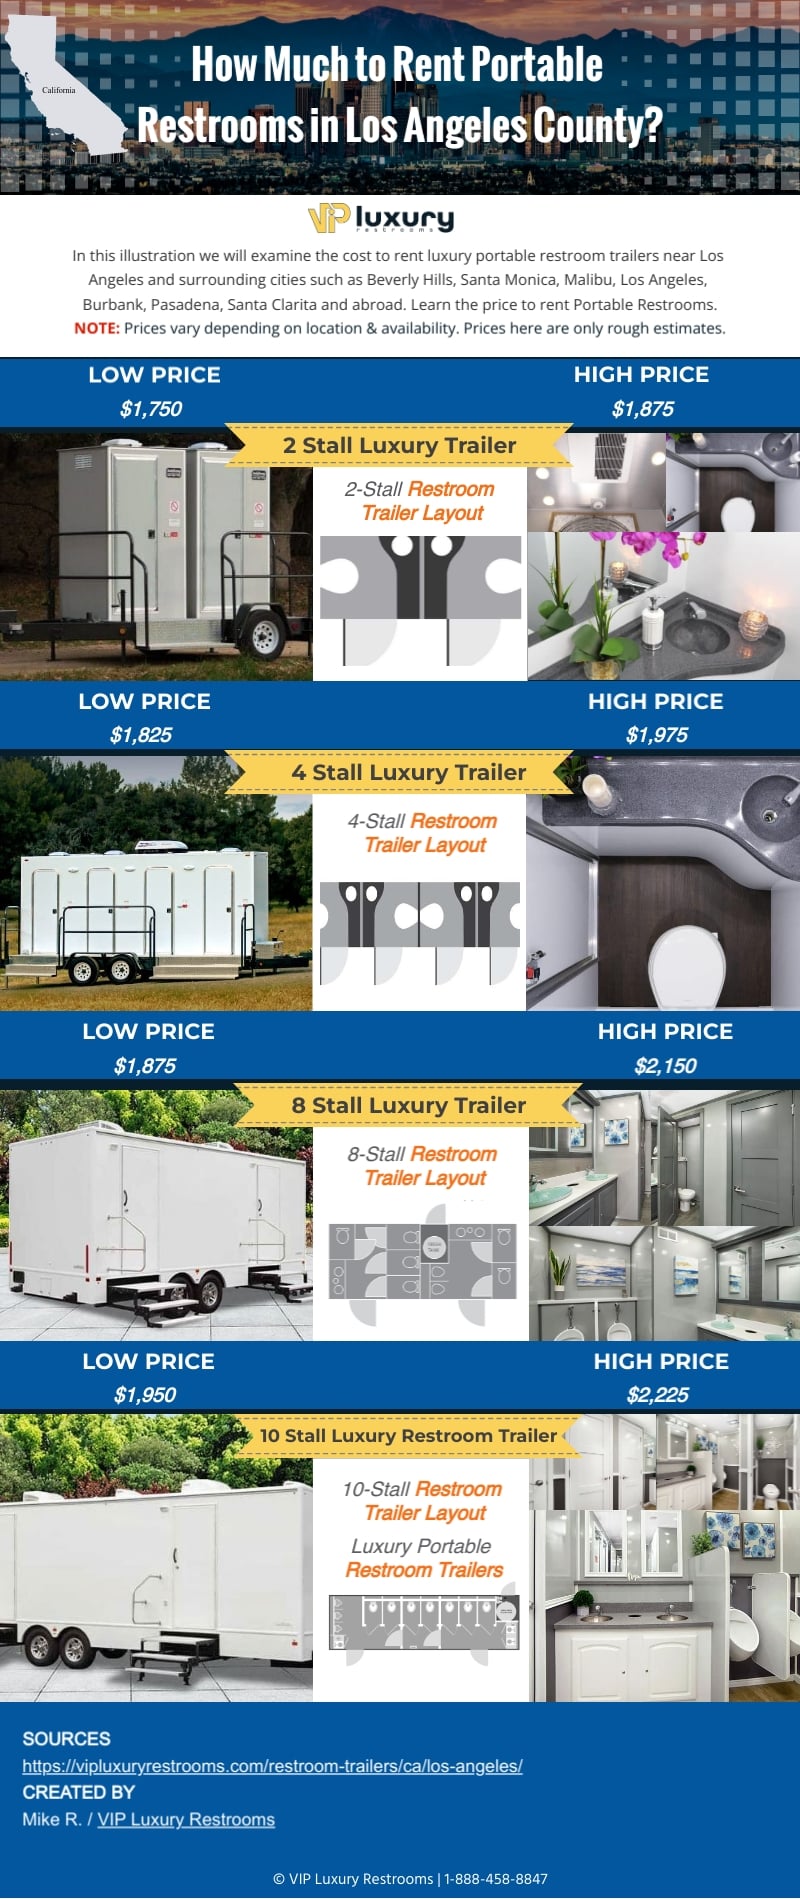 Info graphic of portable restroom trailer rental prices near LA County areas